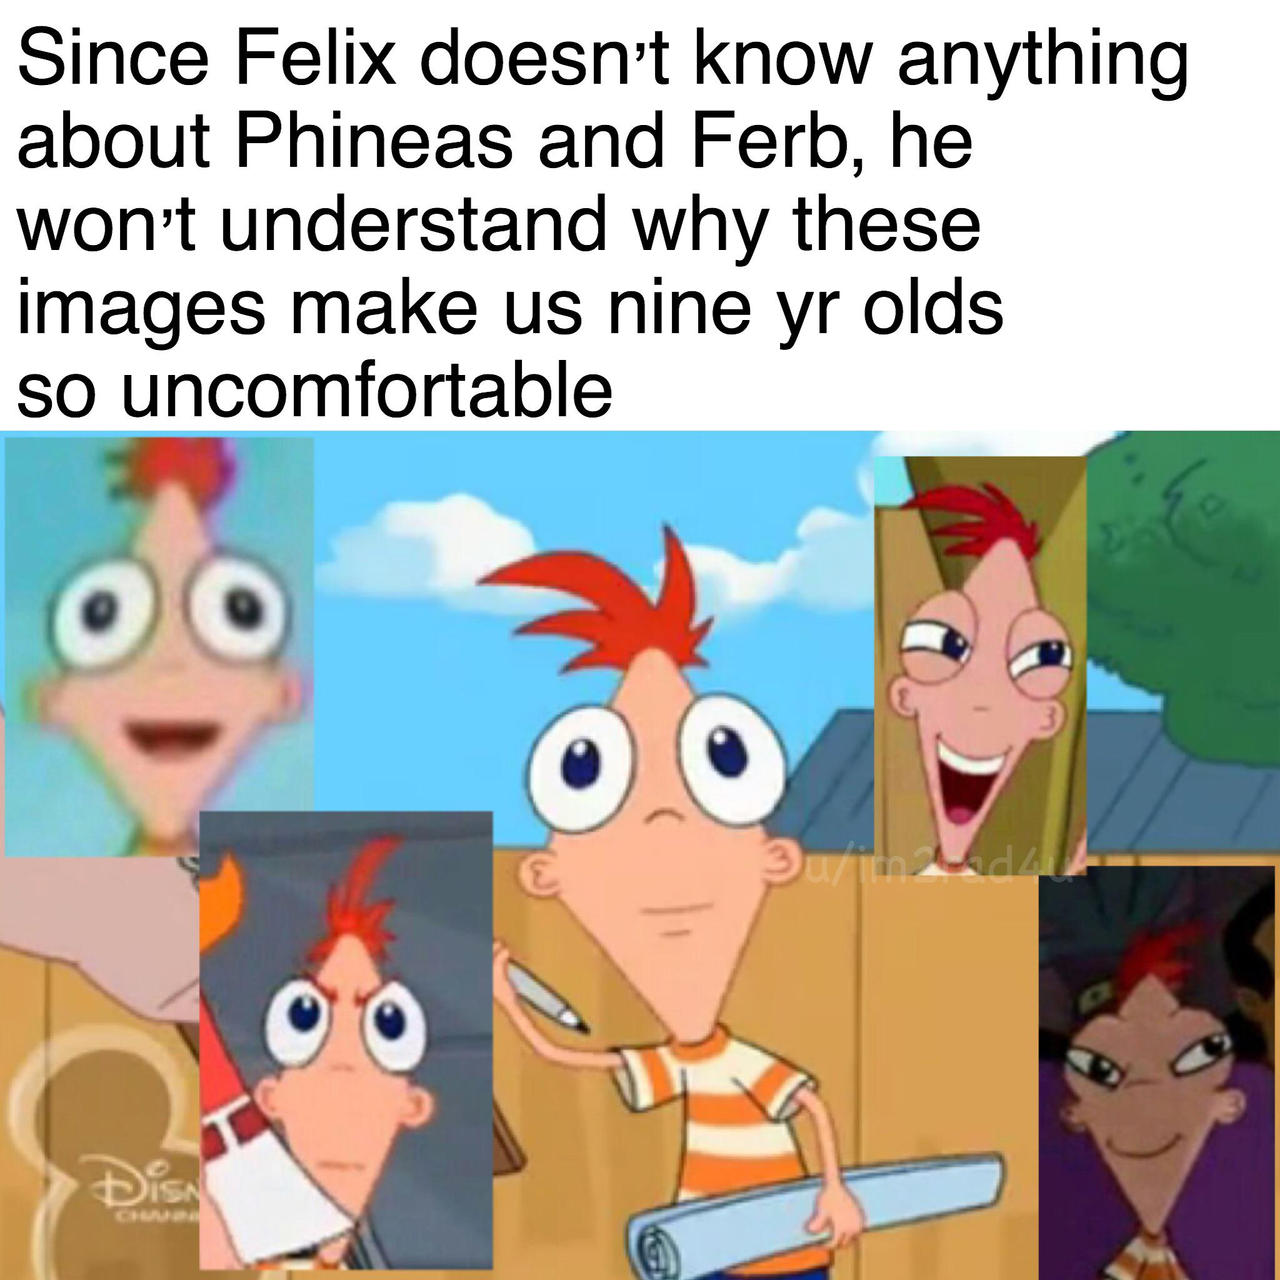 Front facing phineas meme 1 by Bc320903871 on DeviantArt